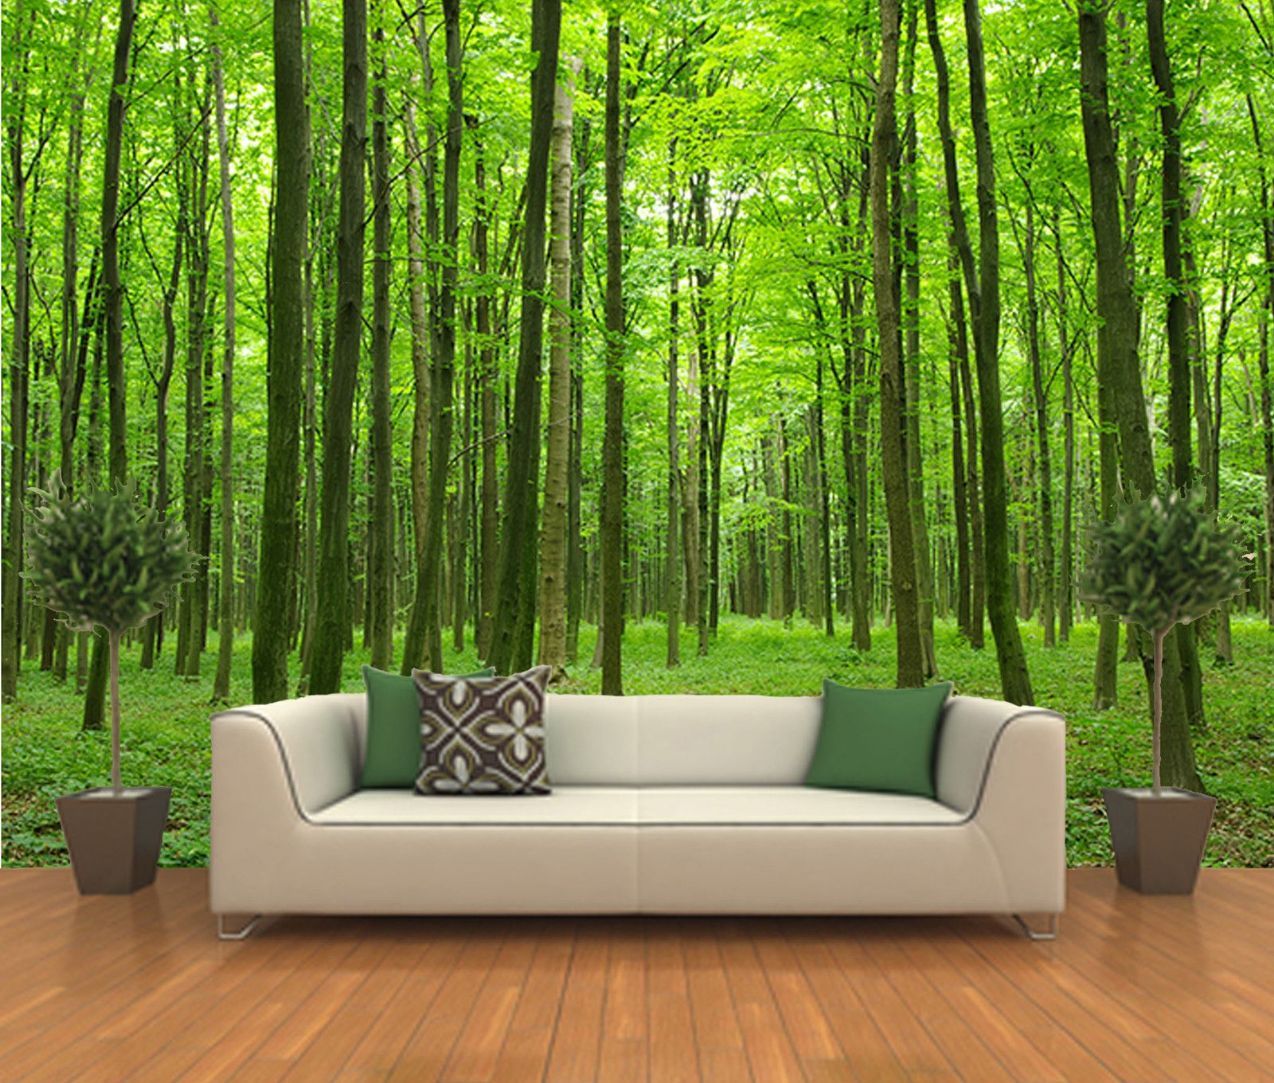 forest wallpaper for bedroom,natural landscape,nature,green,tree,natural environment